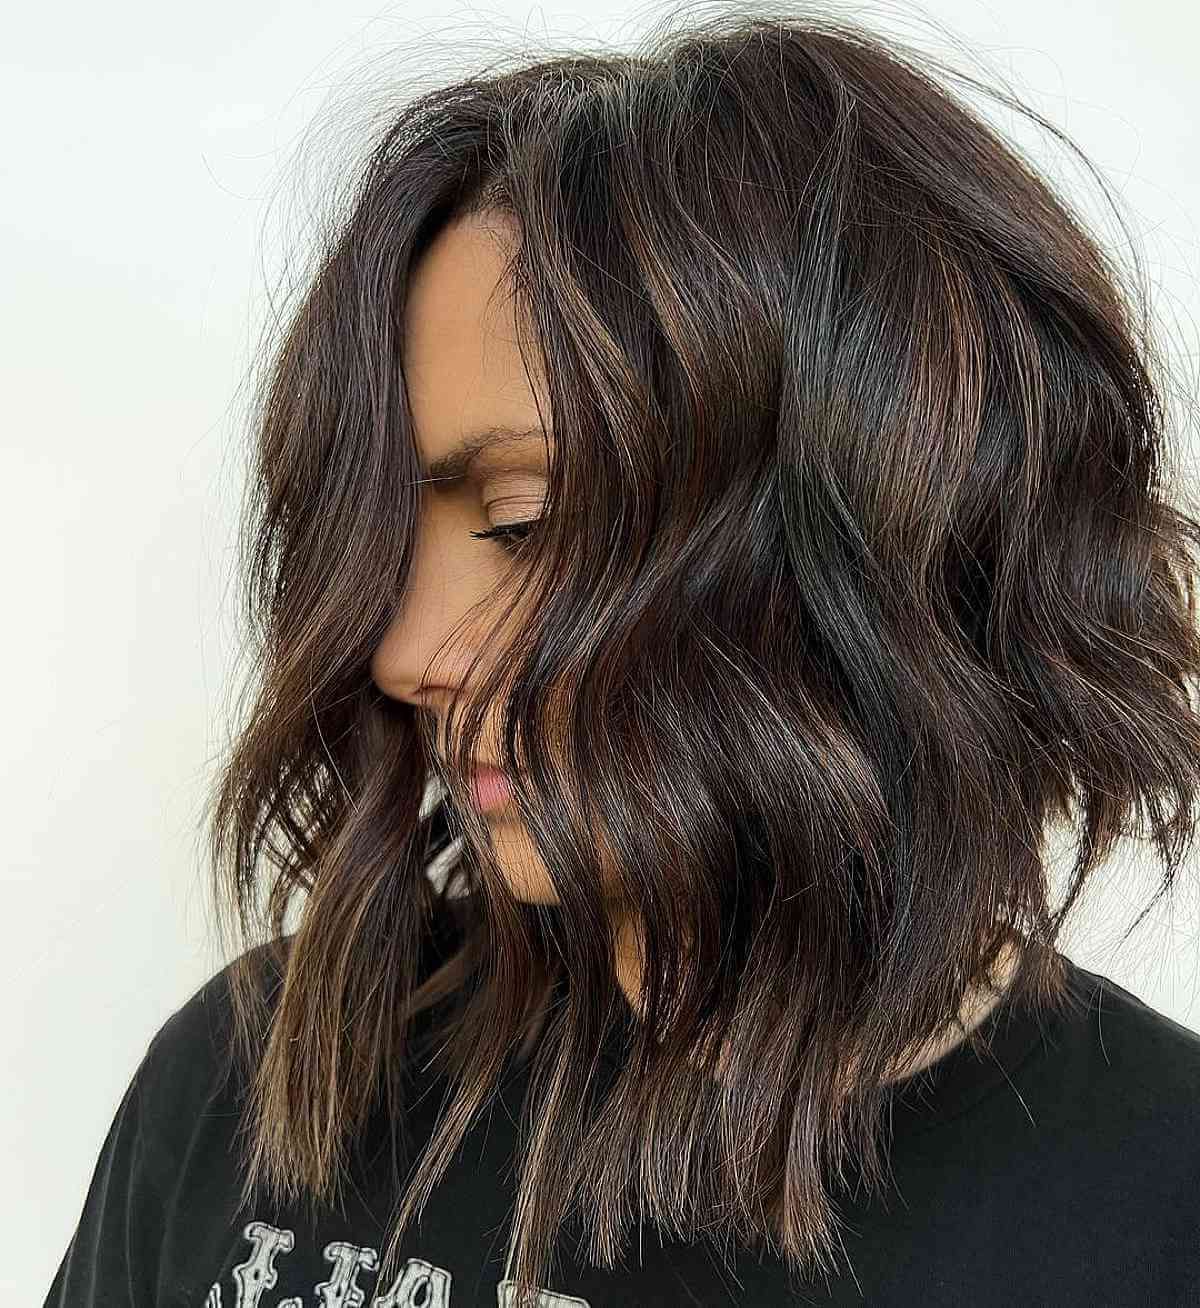 43 Coolest Long Choppy Bob Haircuts For That Beachy Lob Look Pertaining To Most Recent Choppy Lob With Balayage Highlights (View 4 of 18)